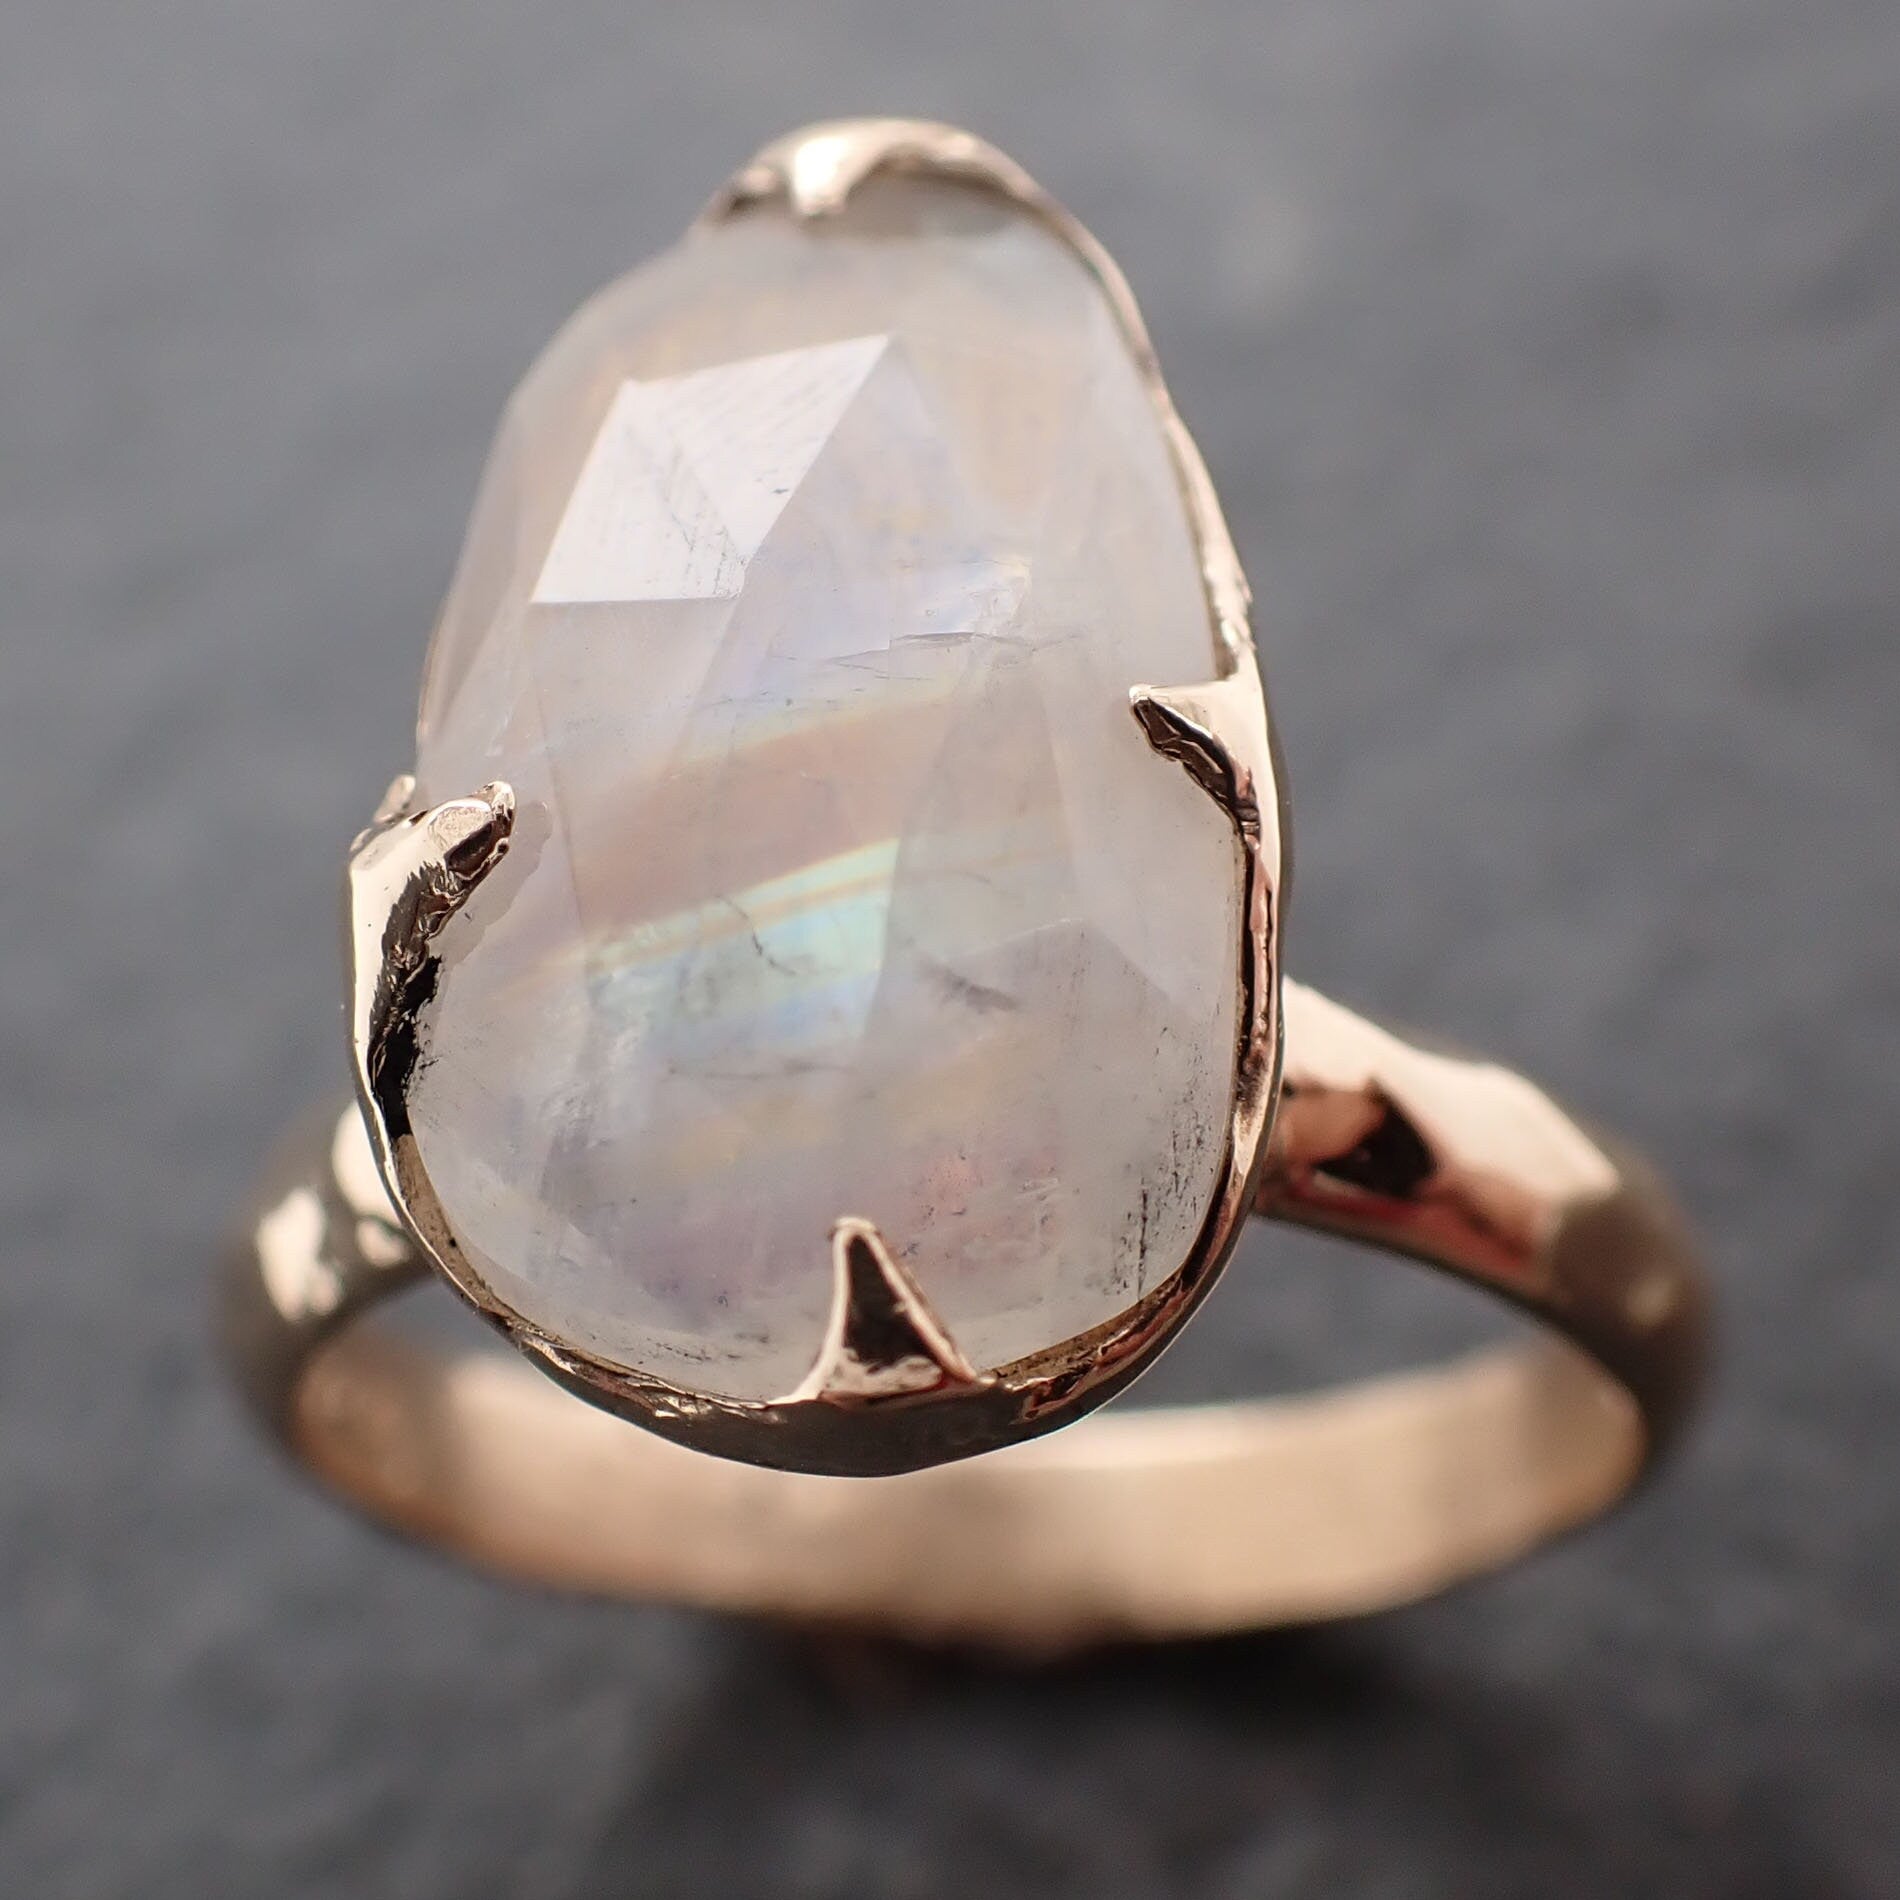 Fancy cut Moonstone Rose Gold Ring Gemstone Solitaire recycled 14k statement cocktail statement 3031